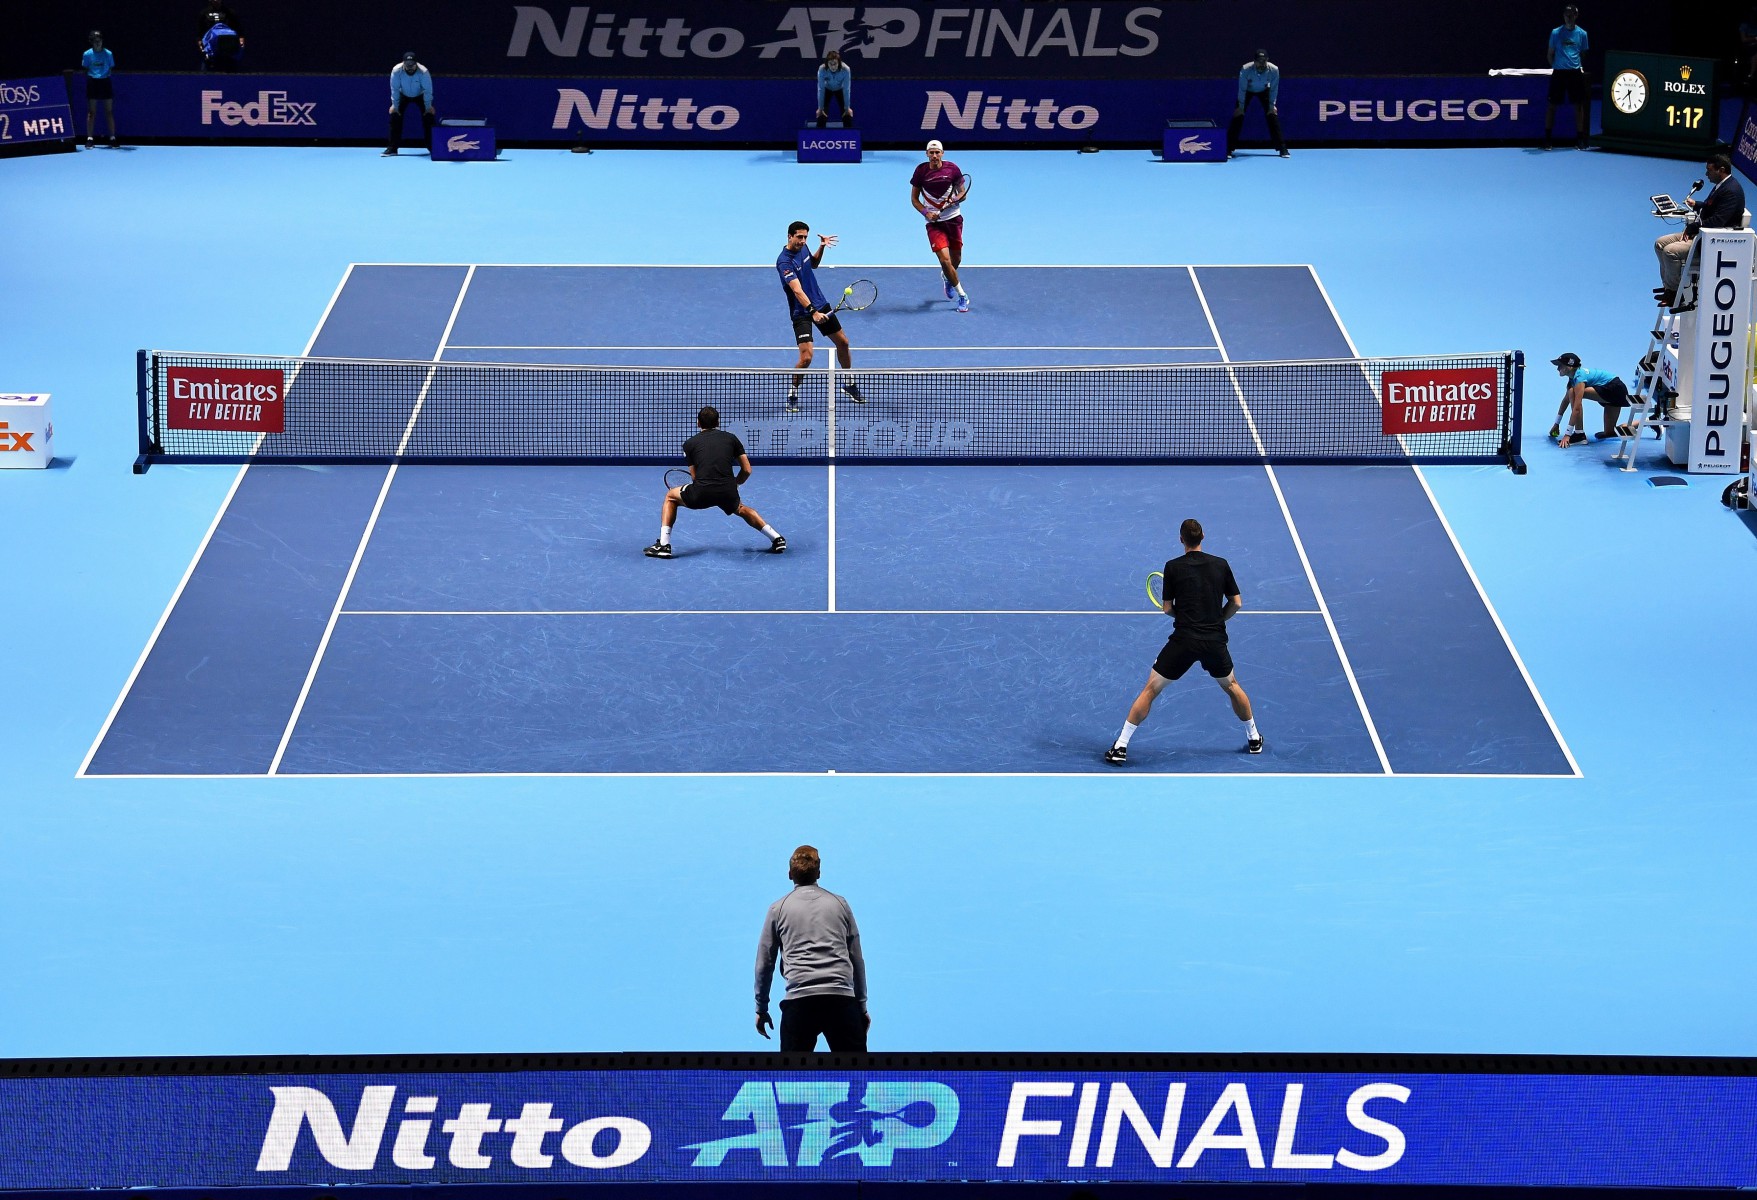 , Tennis fans left baffled by ATP Finals speed gun showing Federer serving 5mph SLOWER and other random results